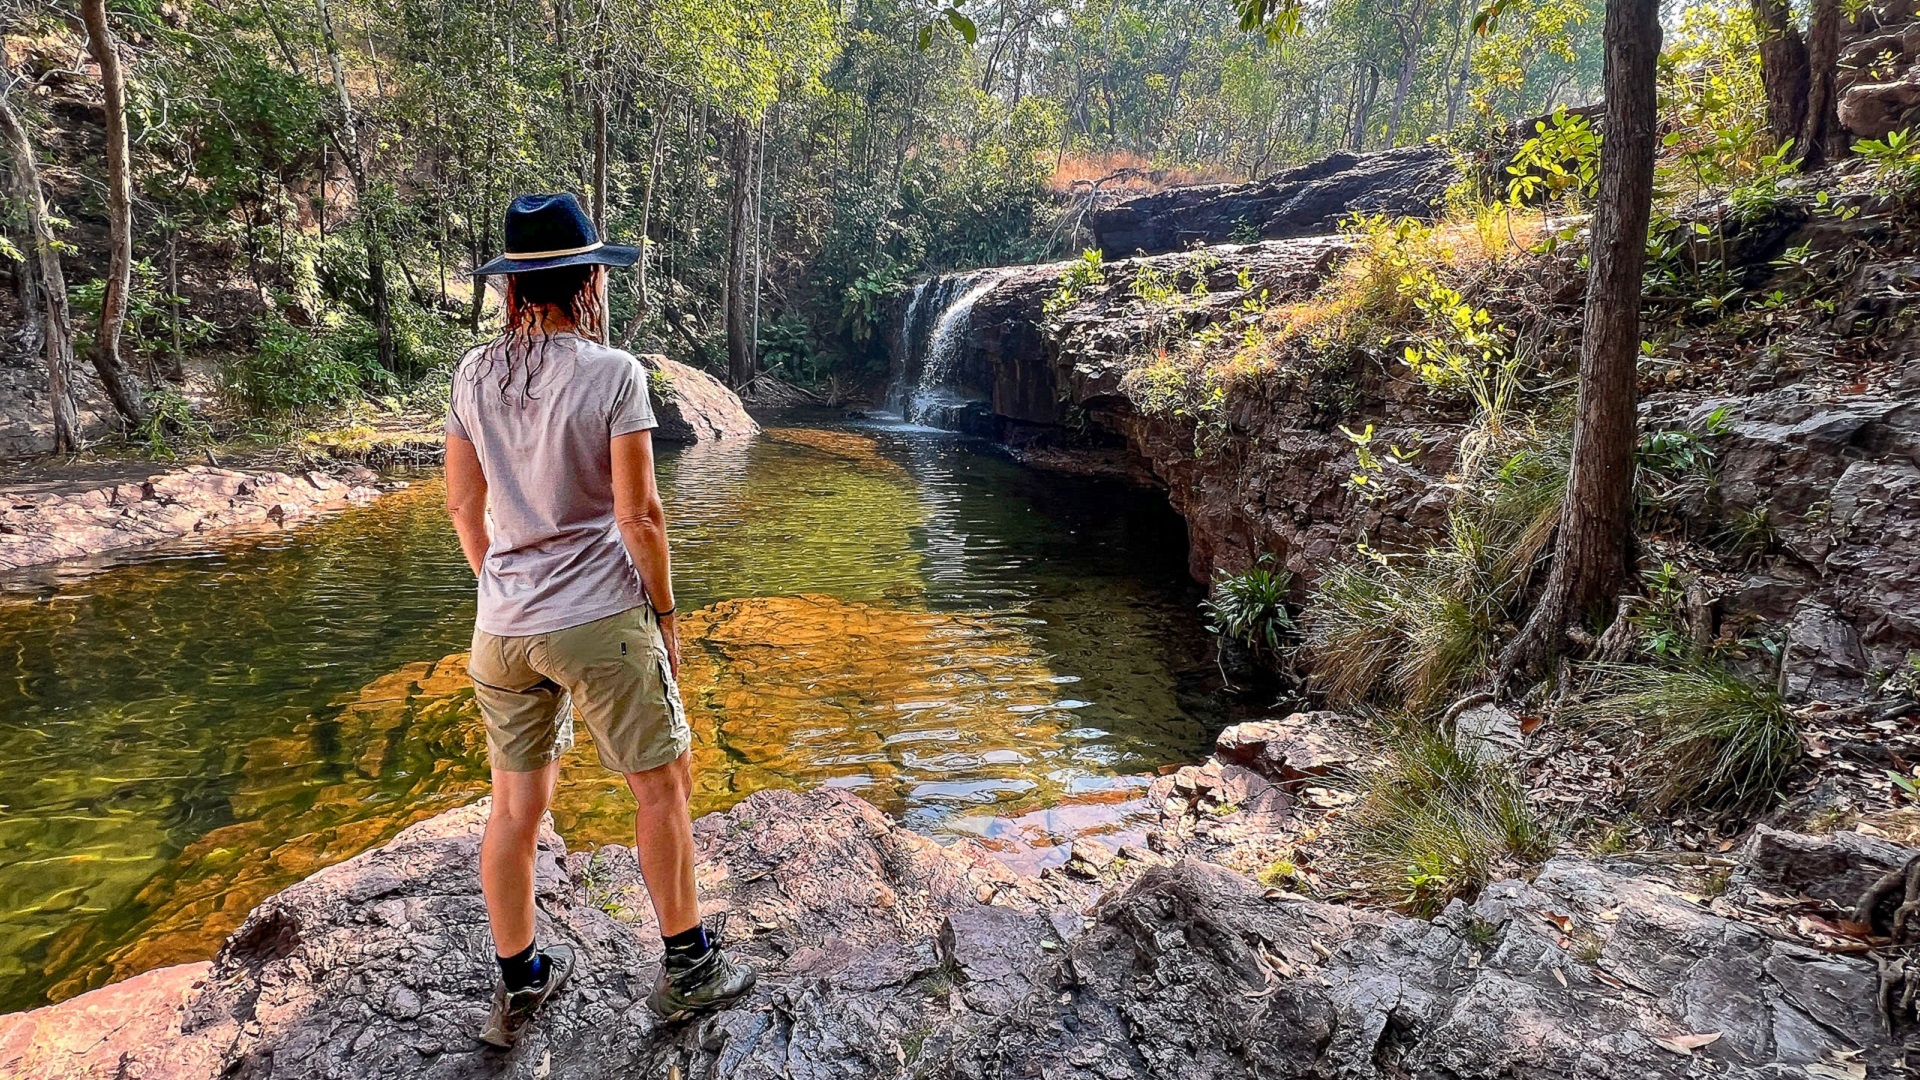 Litchfield Cascades Walk - Top Hikes In The Top End: Part 3